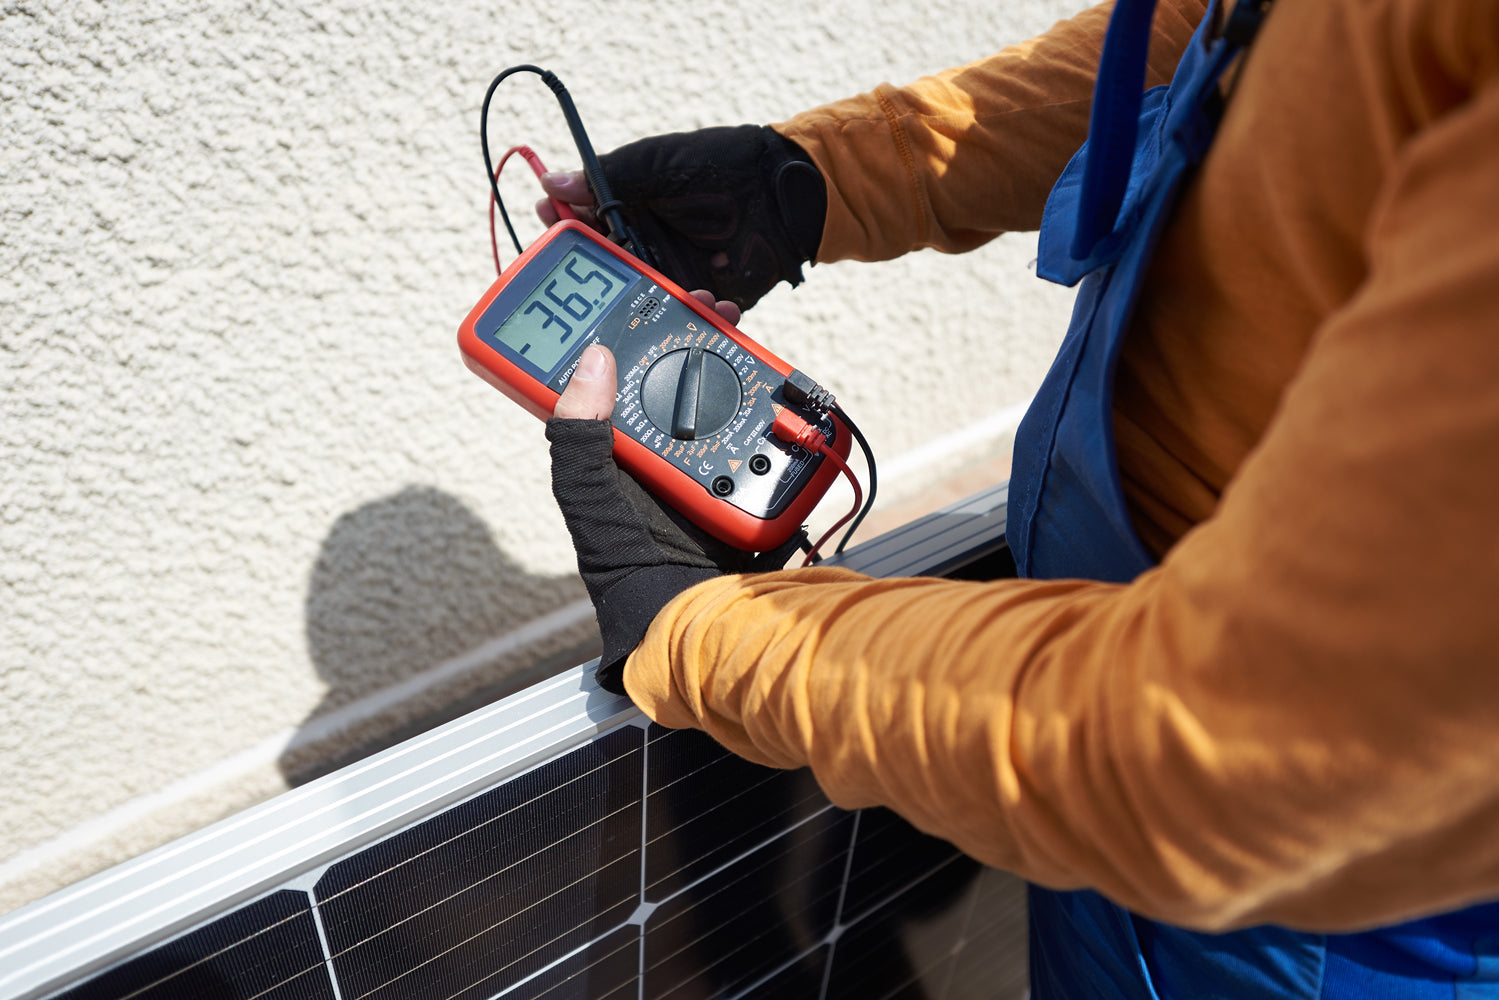 How to test solar panel condition and performance